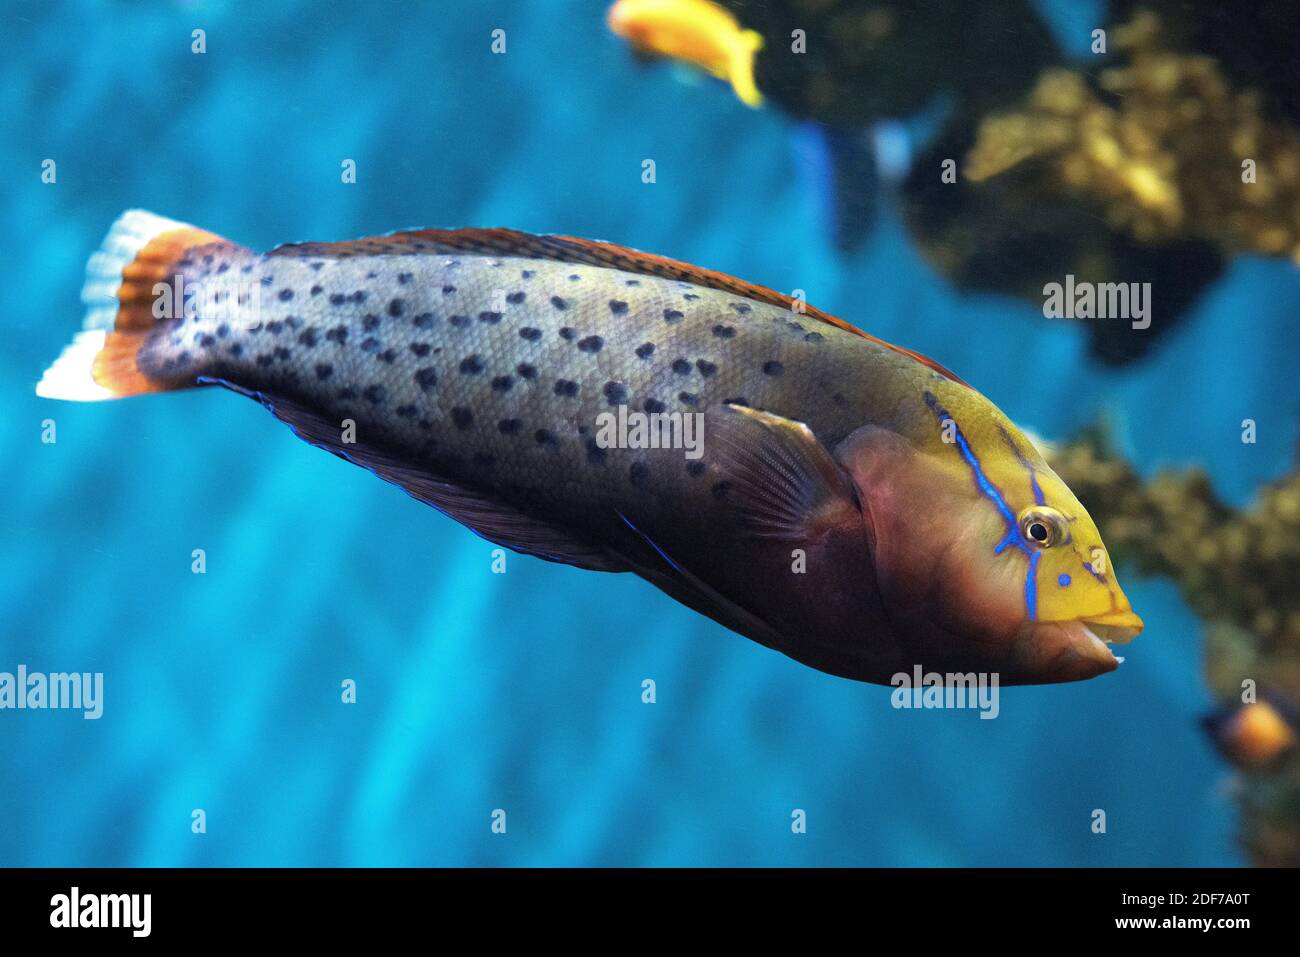 Queen coris or Formosa wrasse (Coris formosa) is a marine fish native to tropical Indian Ocean. Adult specimen. Stock Photo